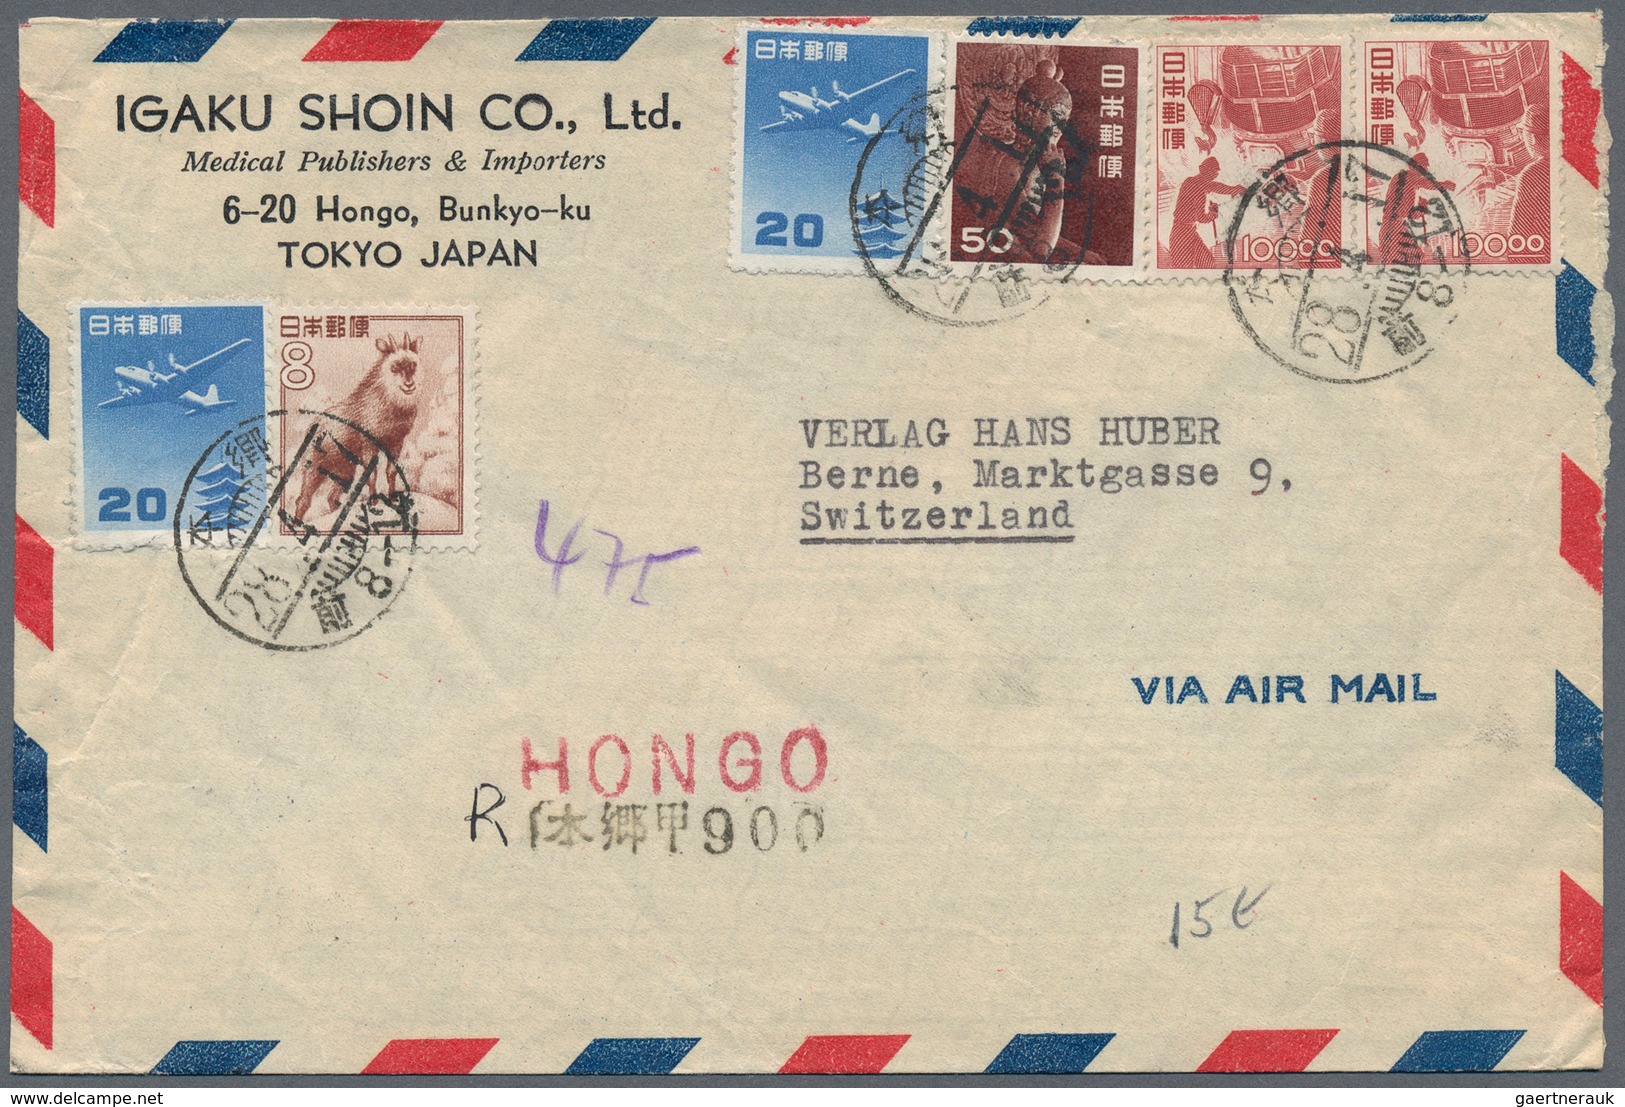 22901 Japan: 1876/1975 (ca.), covers/cards (22), the majority ca. 1900/54 to Switzerland.